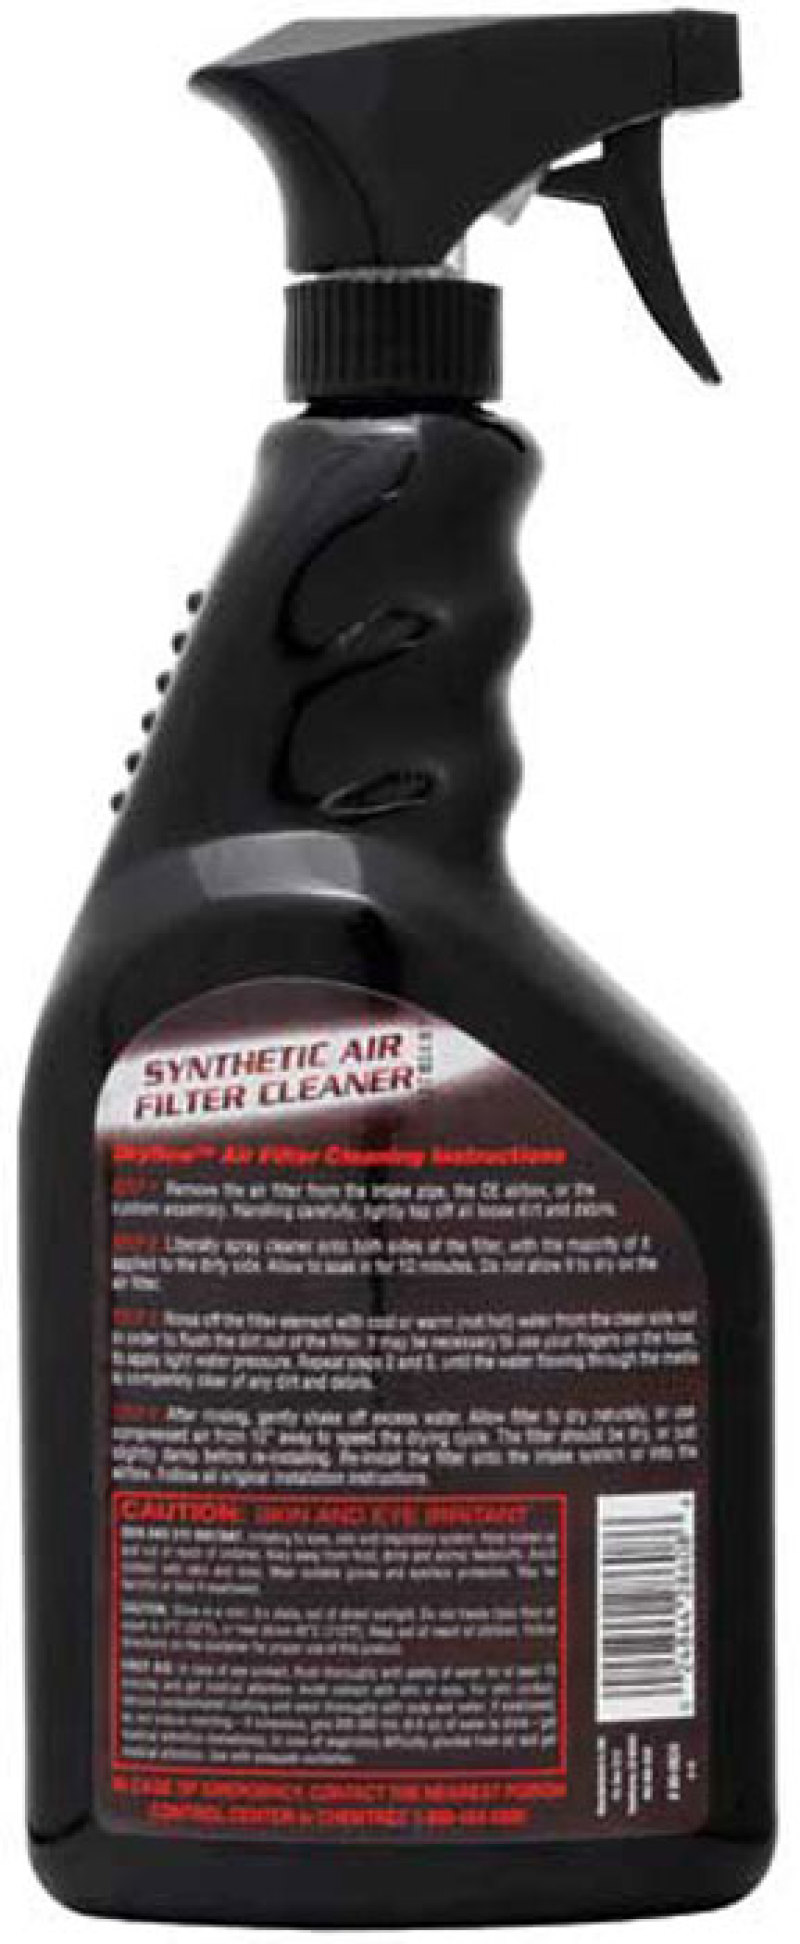 K&N Synthetic Air Filter Cleaner - 99-0624